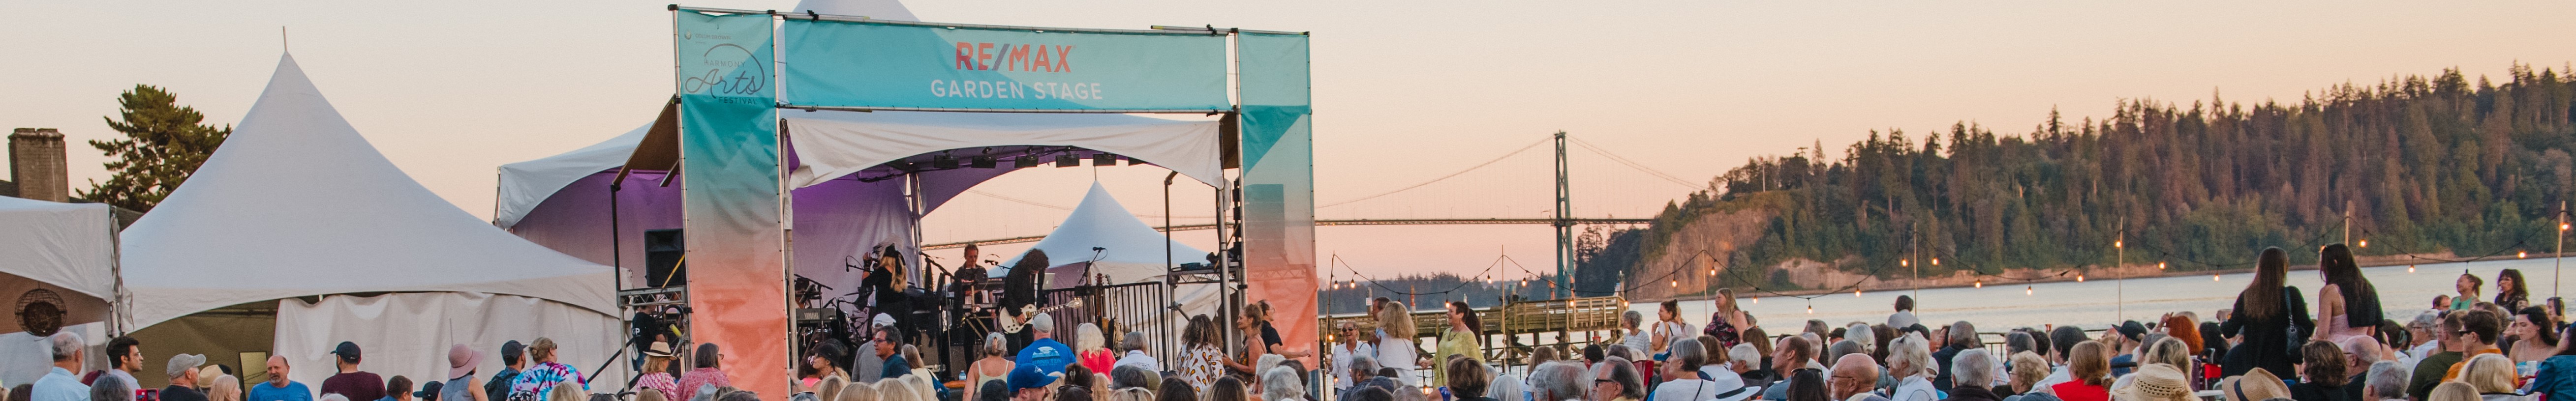 A crowd of people standing in front of tents at Re/Max garden stage with ocean and lions gate bridge in background.